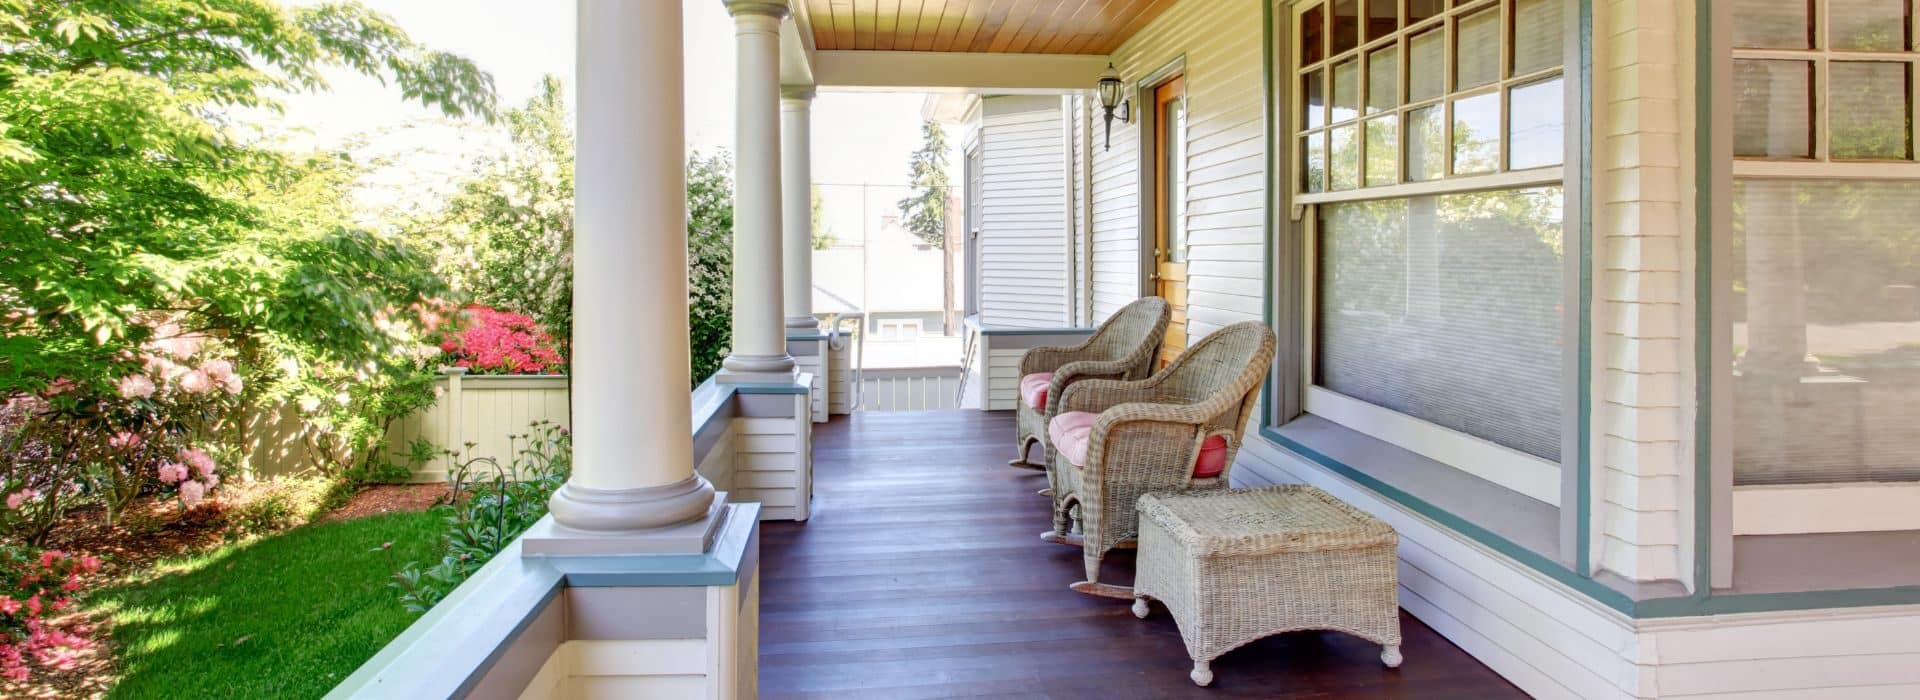 Front porch with wicker chairs during the summer time